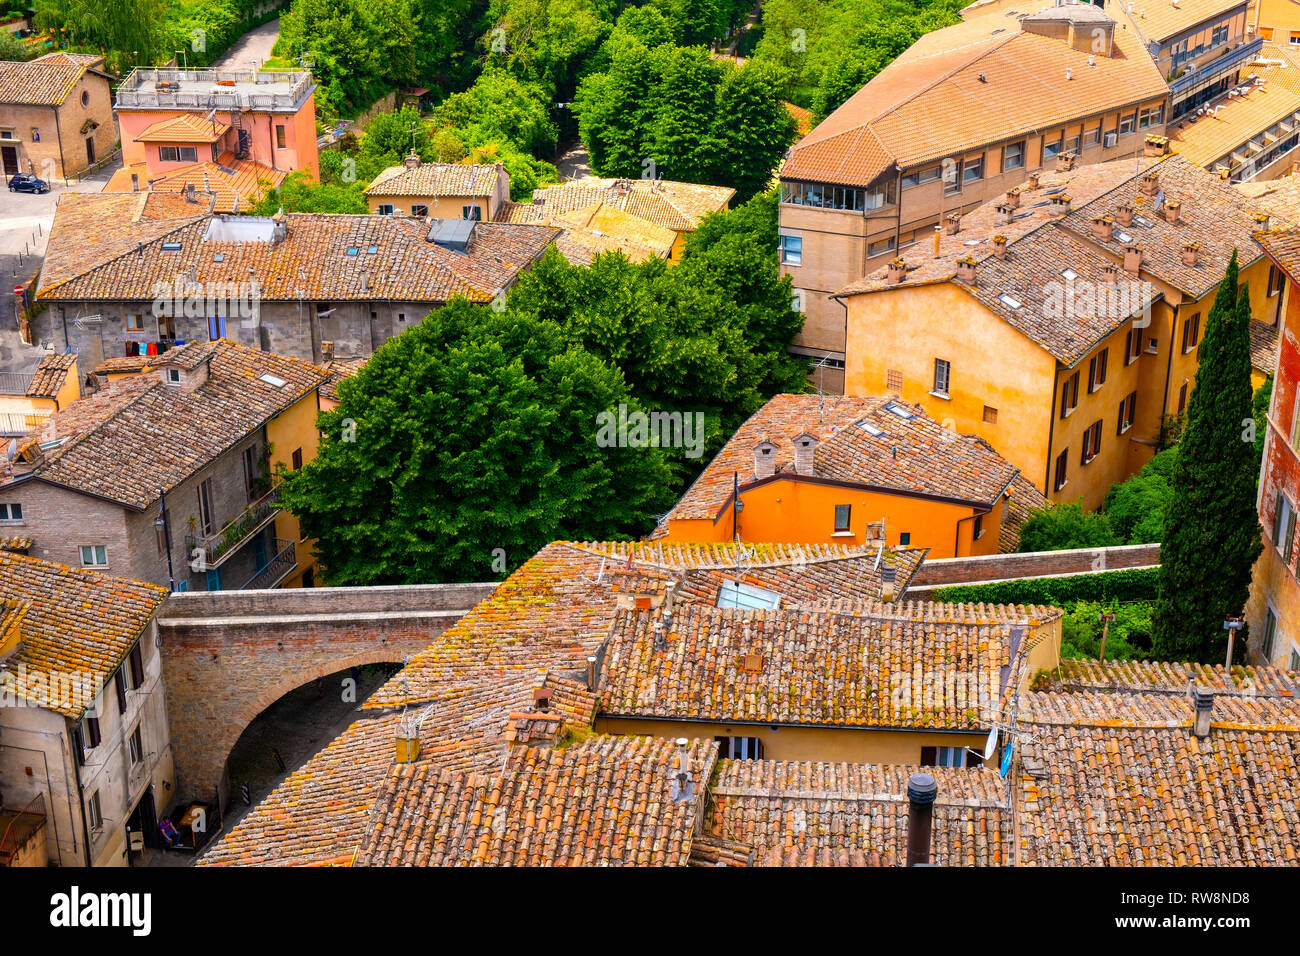 Perugia, Umbria / Italy - 2018/05/28: Panoramic view of historic aqueduct forming Via dell Acquedotto pedestrian street along the ancient Via Appia Stock Photo